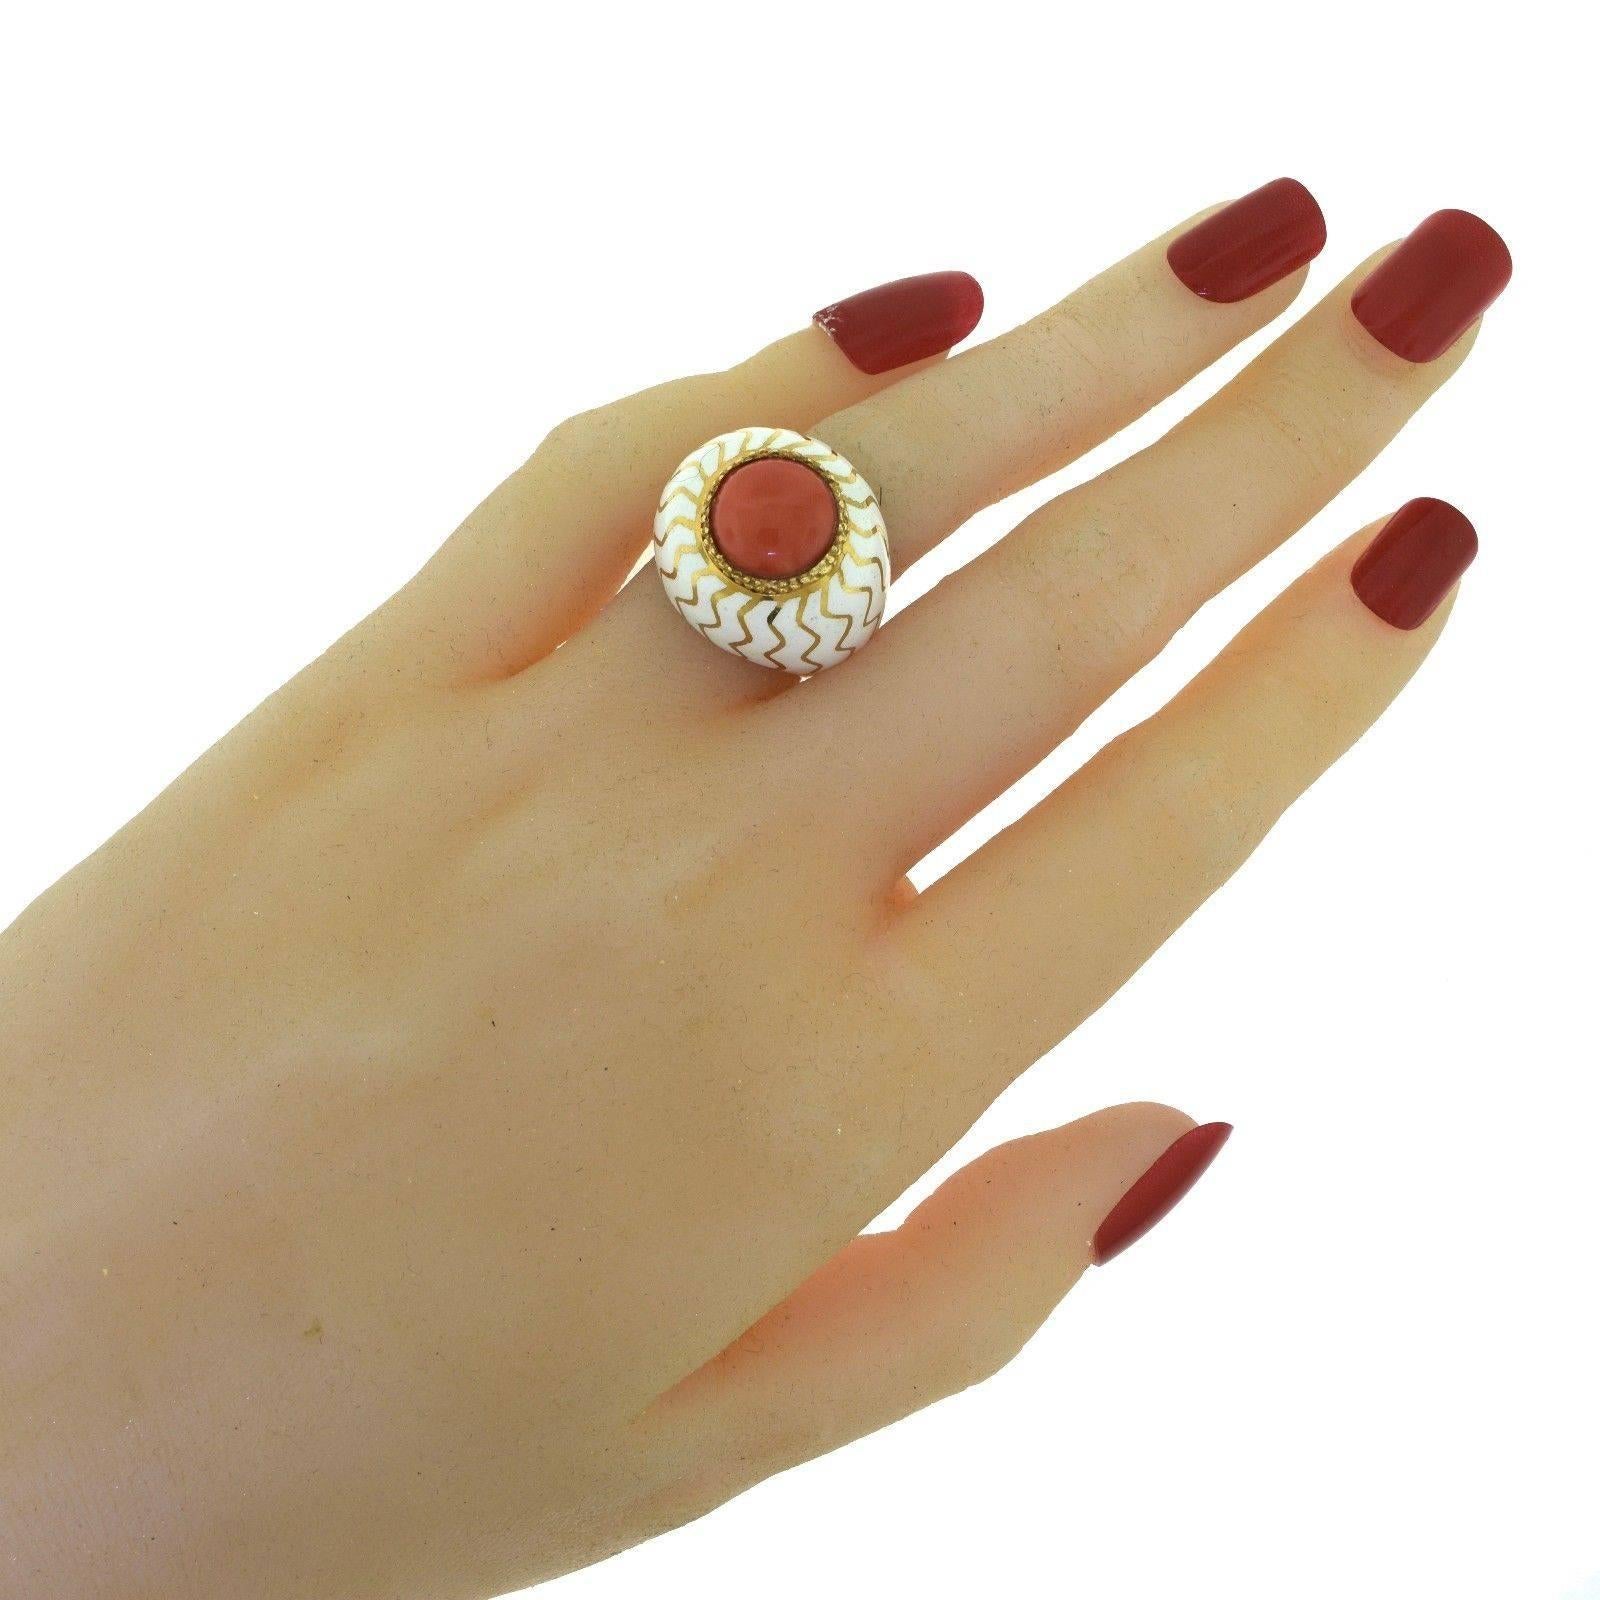 Style: Dome / Cocktail

Metal: Yellow Gold

Metal Purity: 18k 

Stone: 1 Cabochon Red Coral

Coral Diameter: 9.67 mm 

Non-Metal Material: White Enamel 

Total Item Weight (g): 14.5

Ring Size: 6.25 (sizable)

Ring Height: 15.24 mm

Ring Diameter: